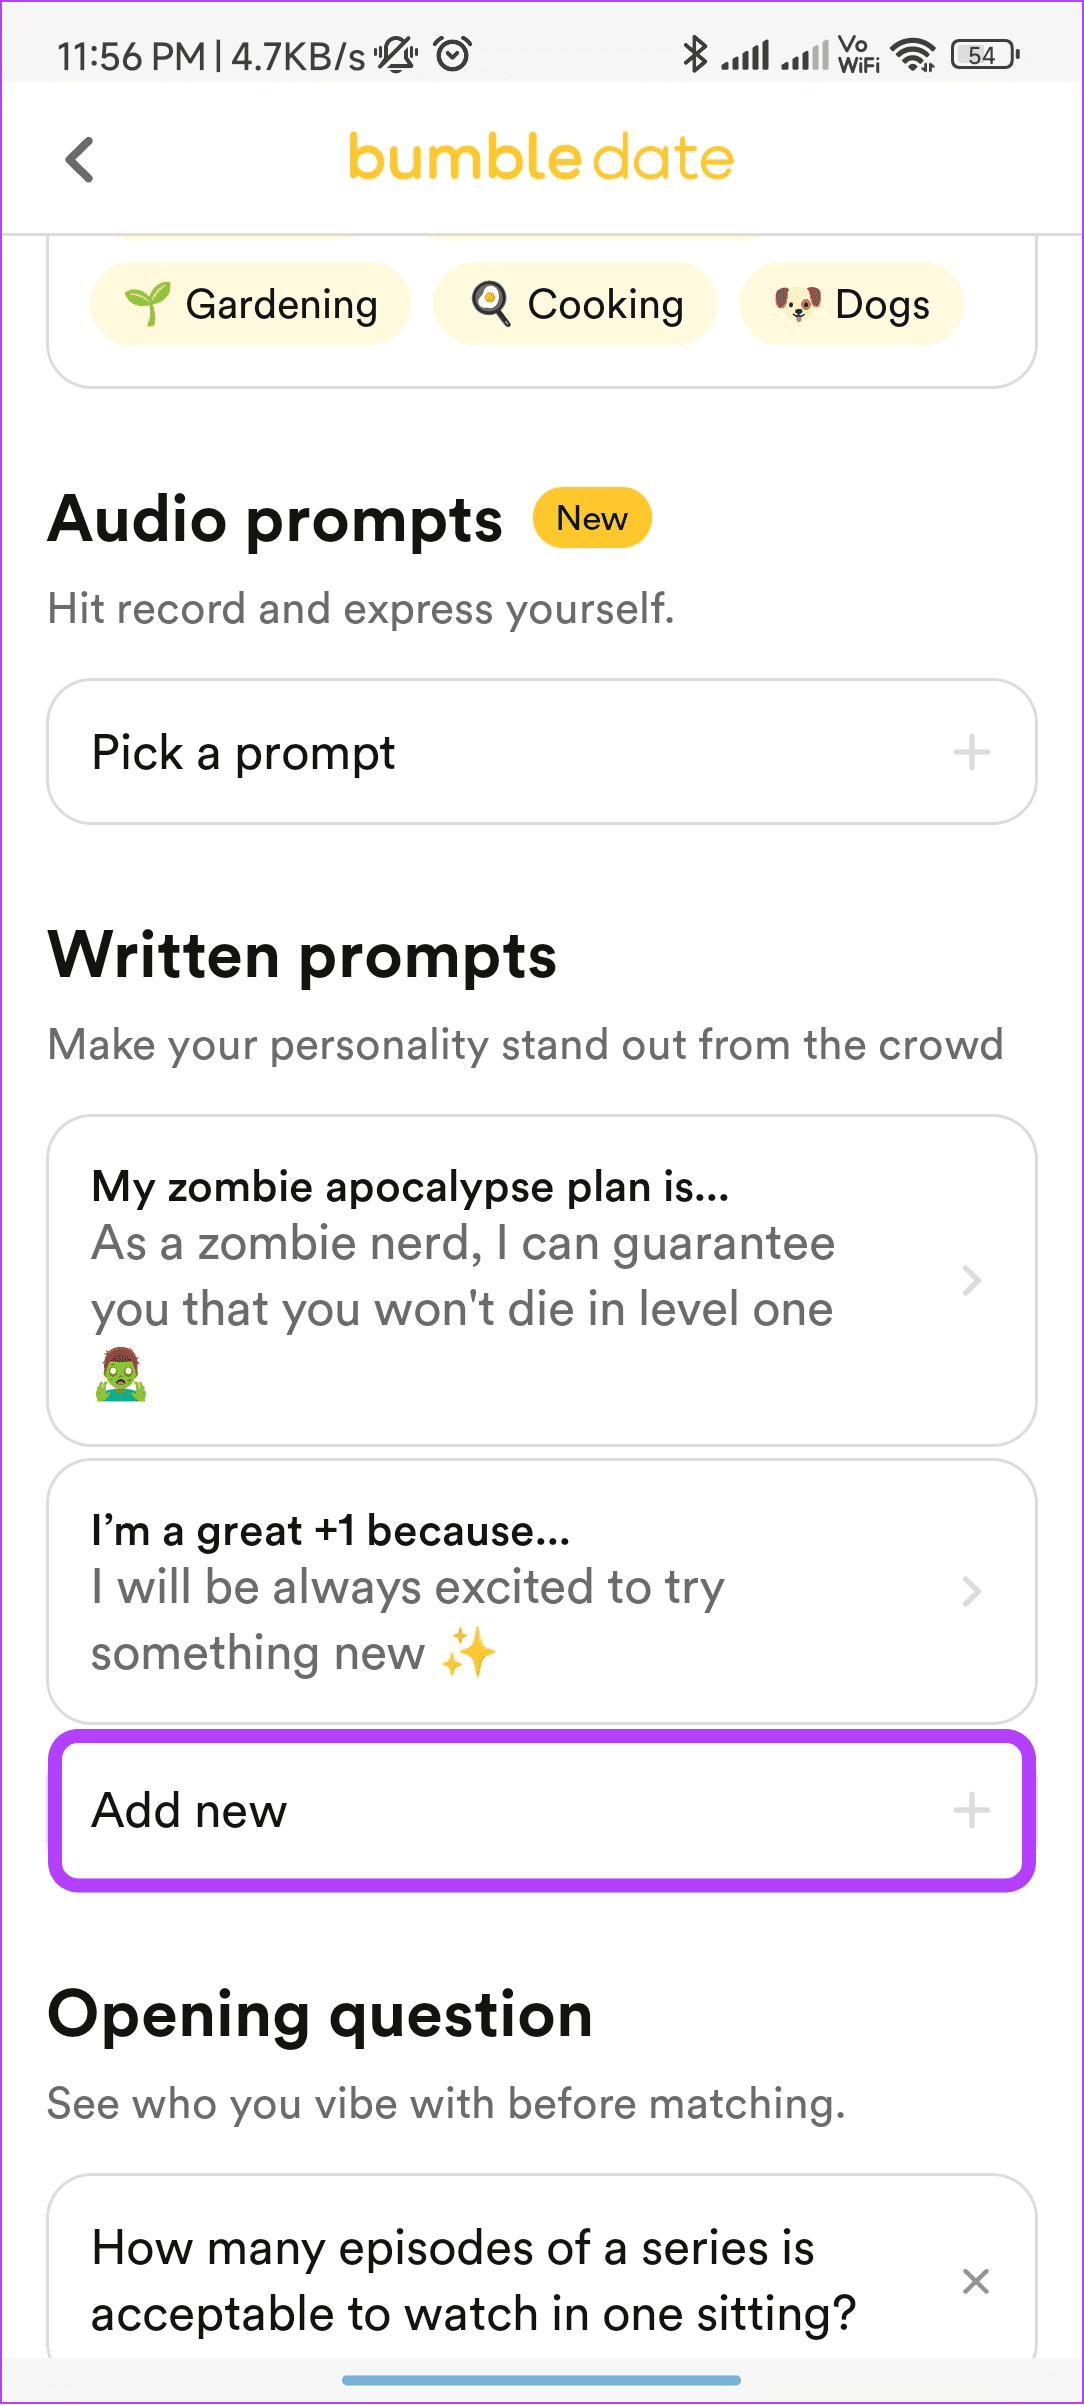 tap add new to add a new written and audio prompt